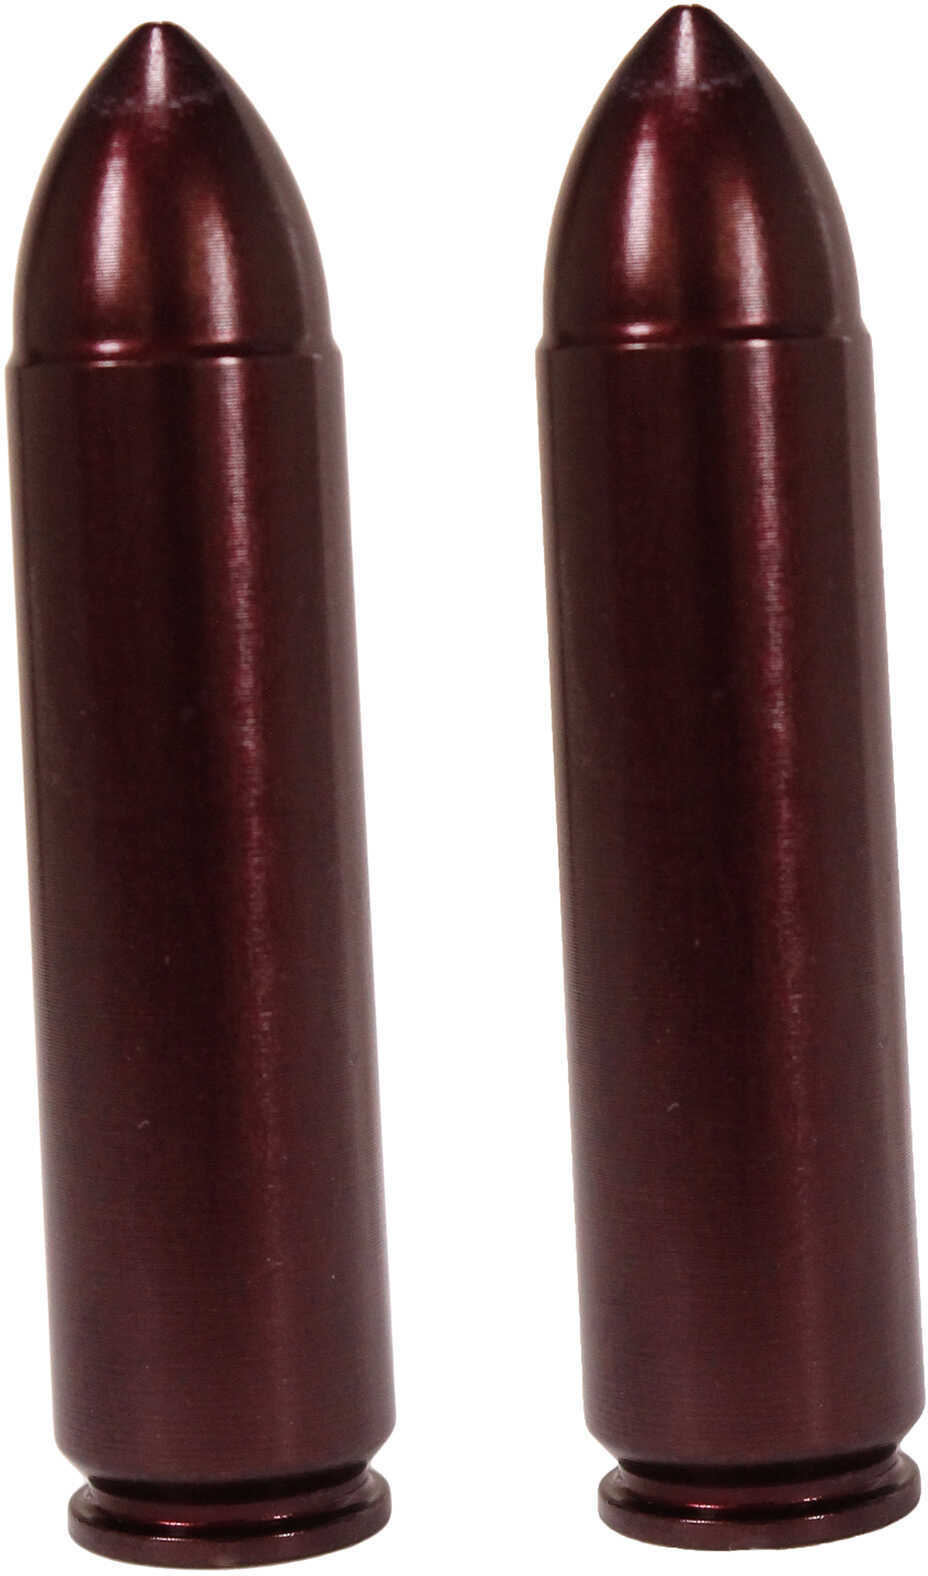 A-zoom Rifle Metal Snap Caps .450 Bushmaster, Package Of 2